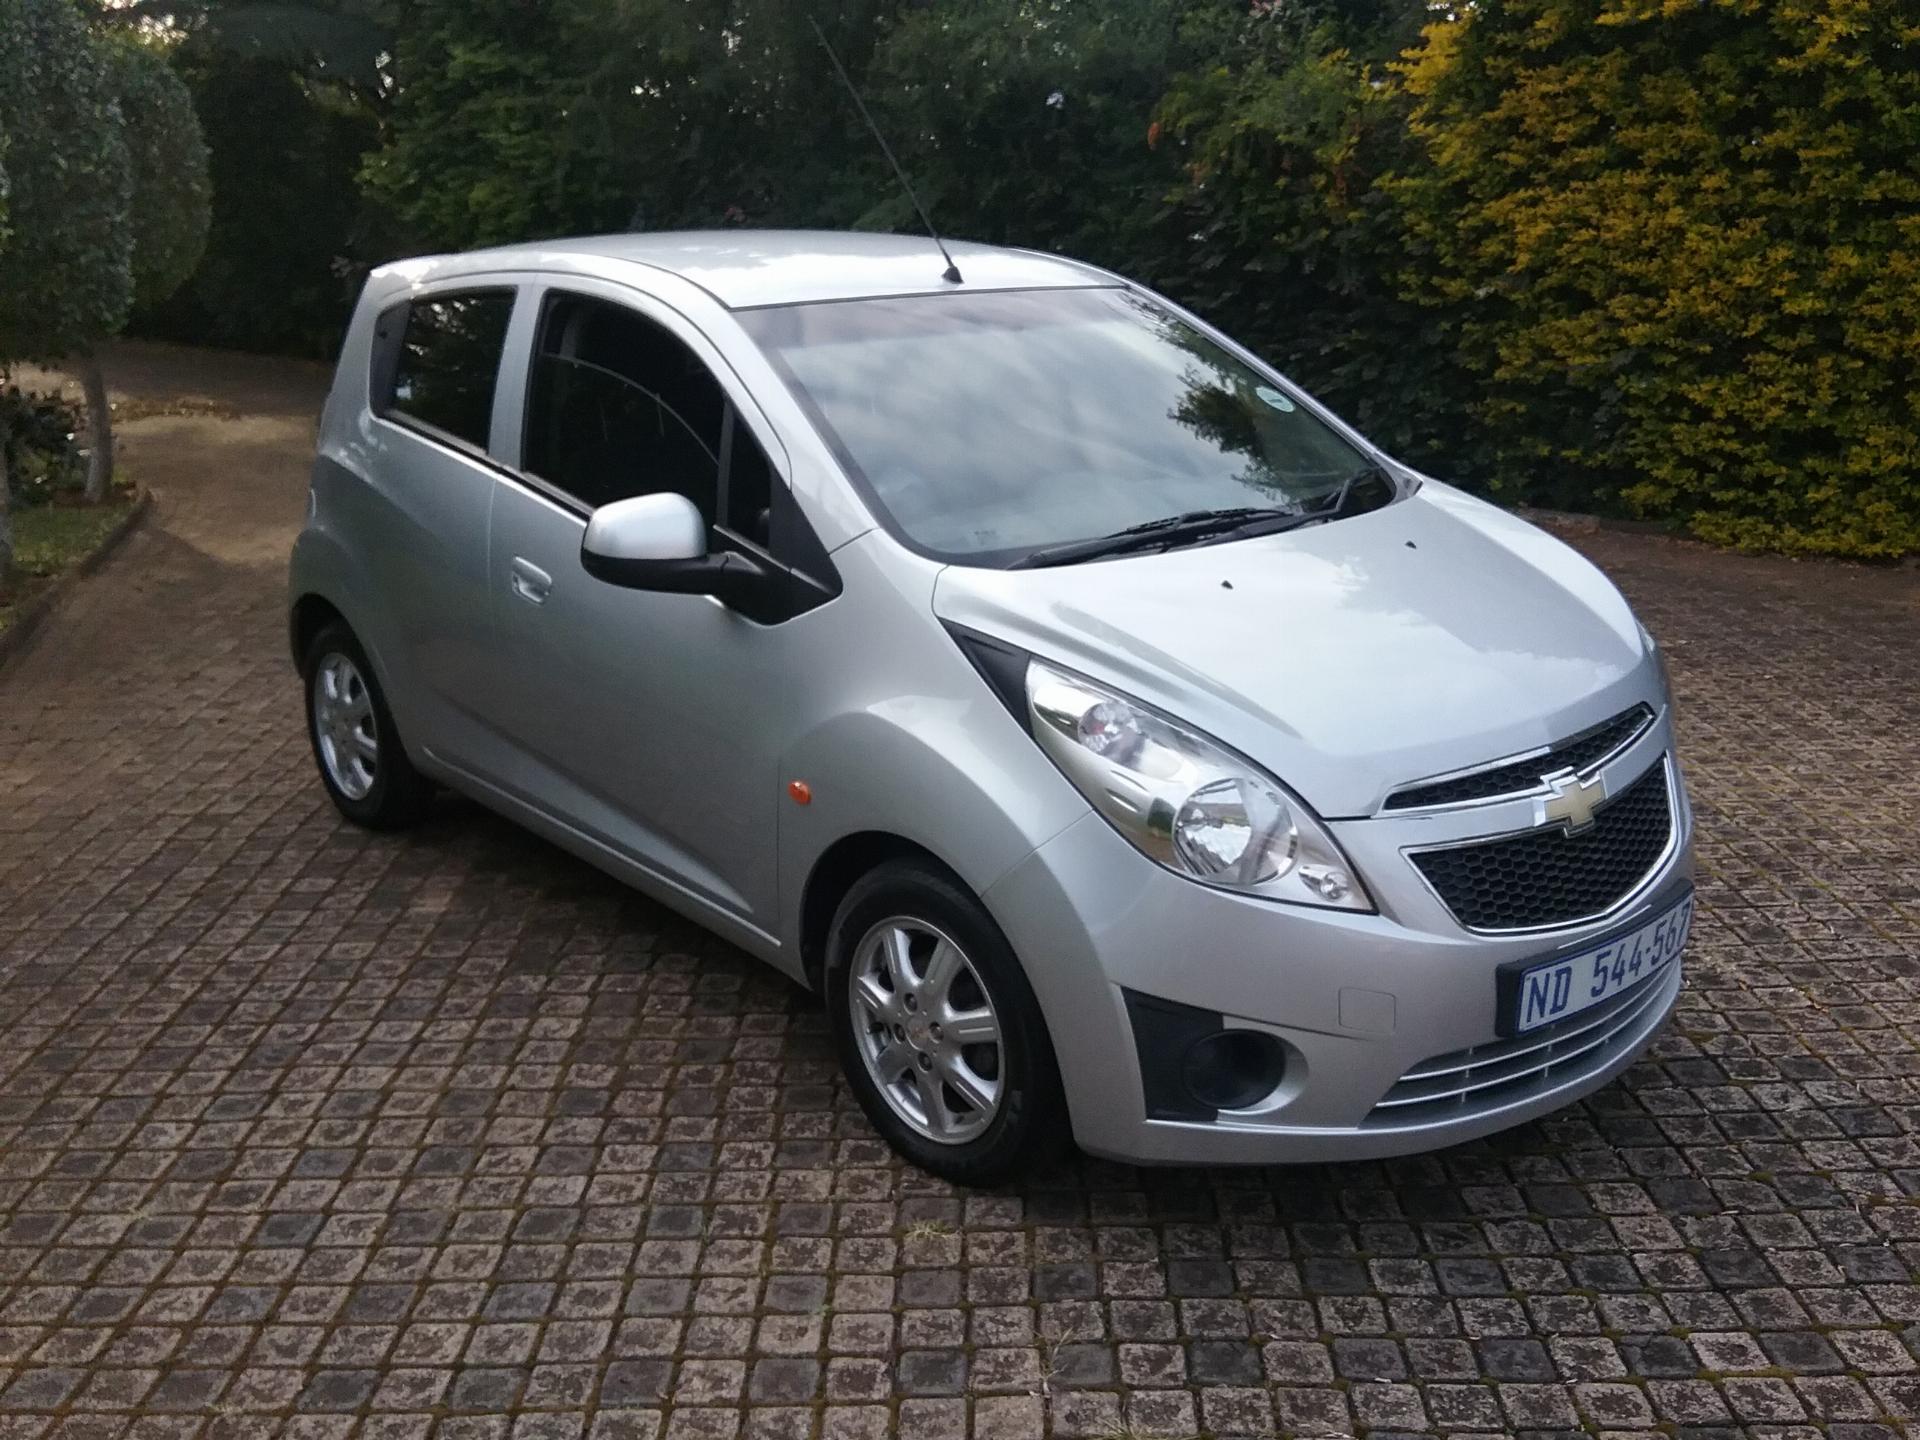 Used Chevrolet Spark 1.2 LS 2011 on auction - MC1907060011